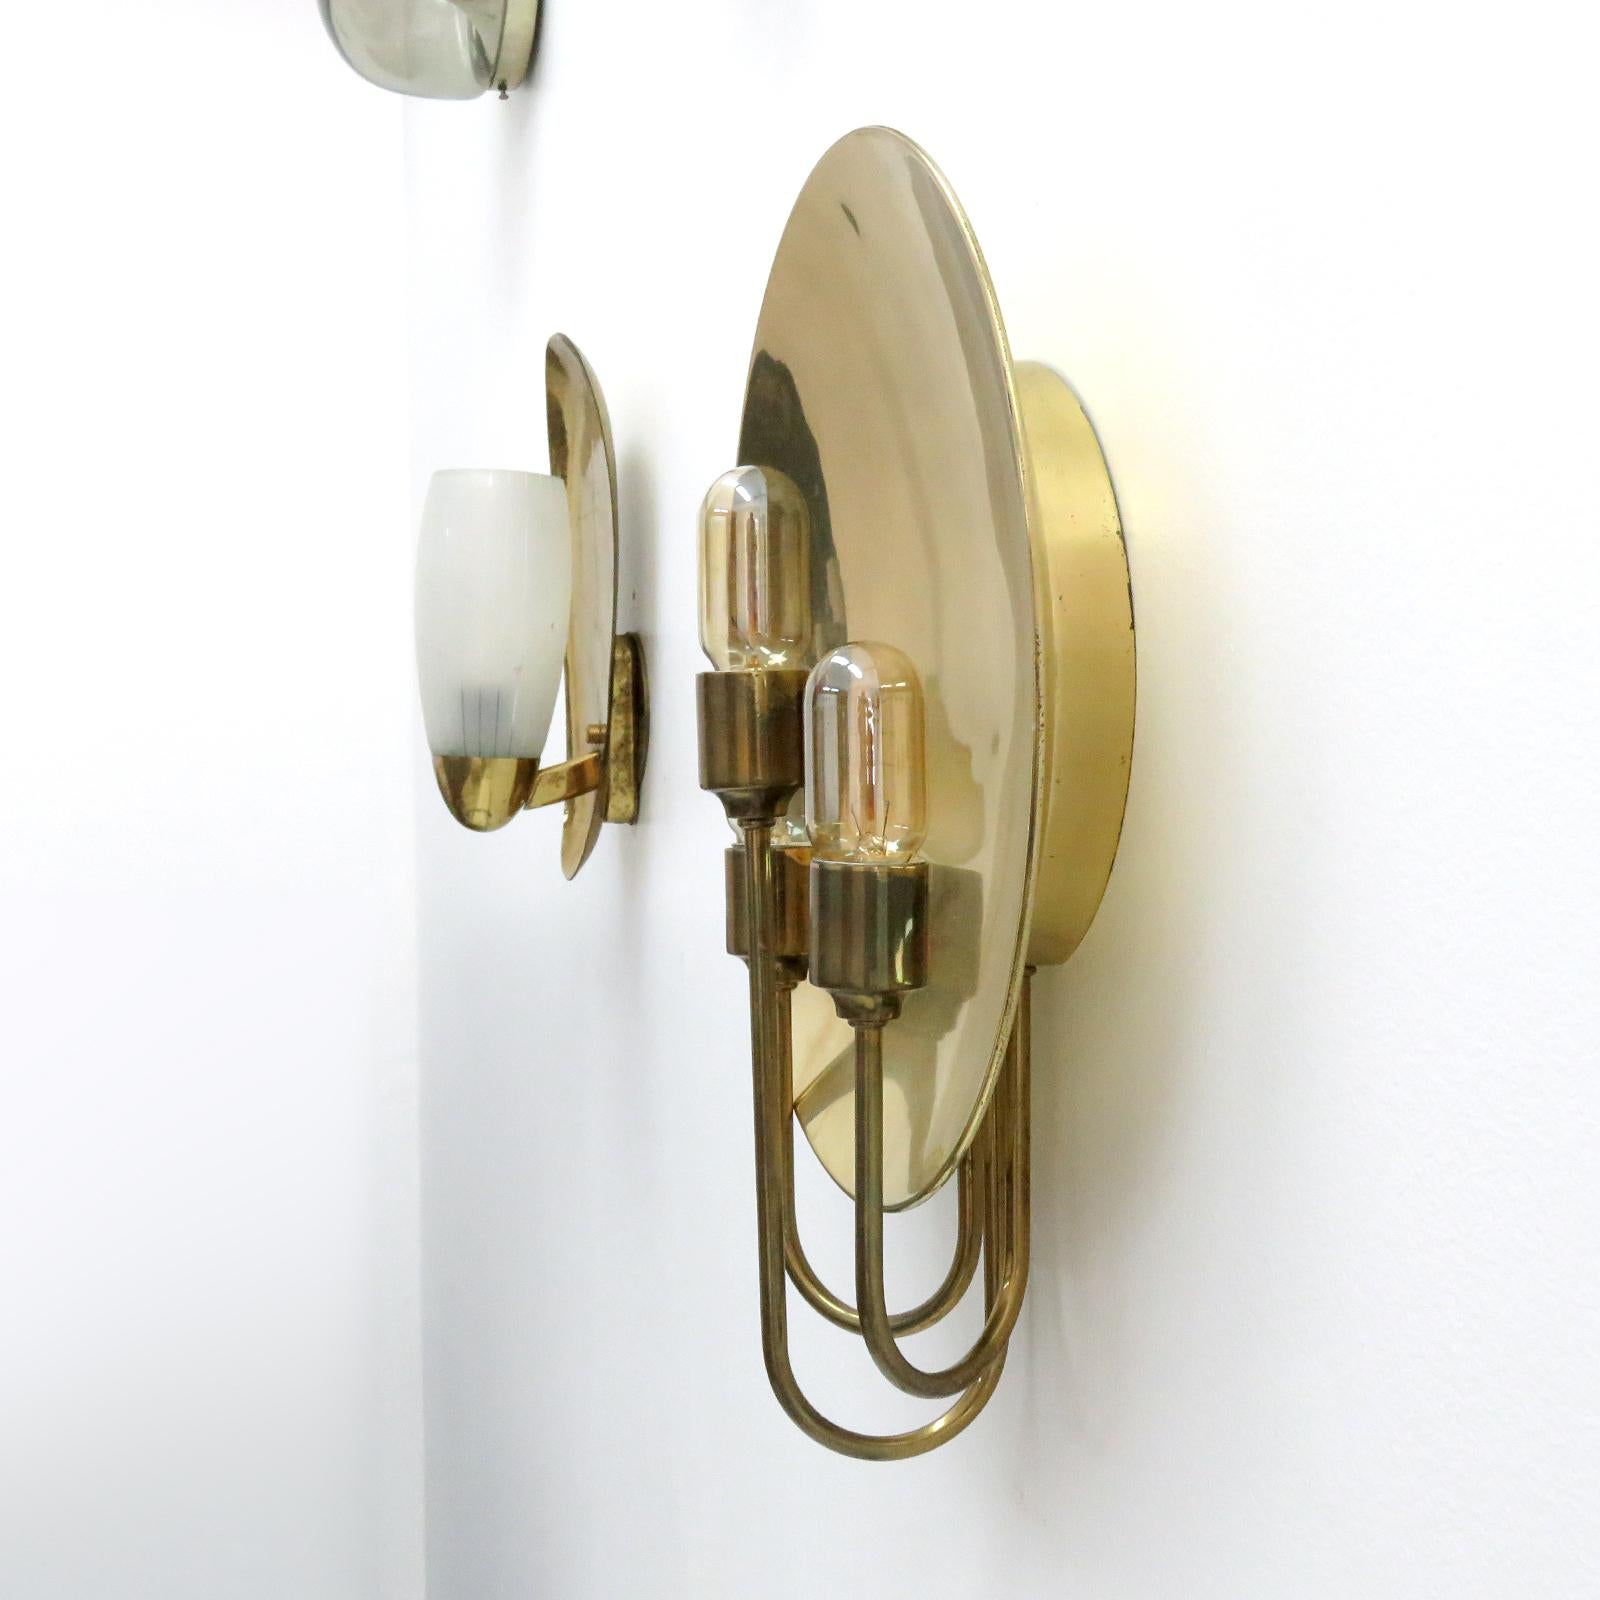 Polished Florian Schulz 'W185' Brass Wall Light, 1960 For Sale